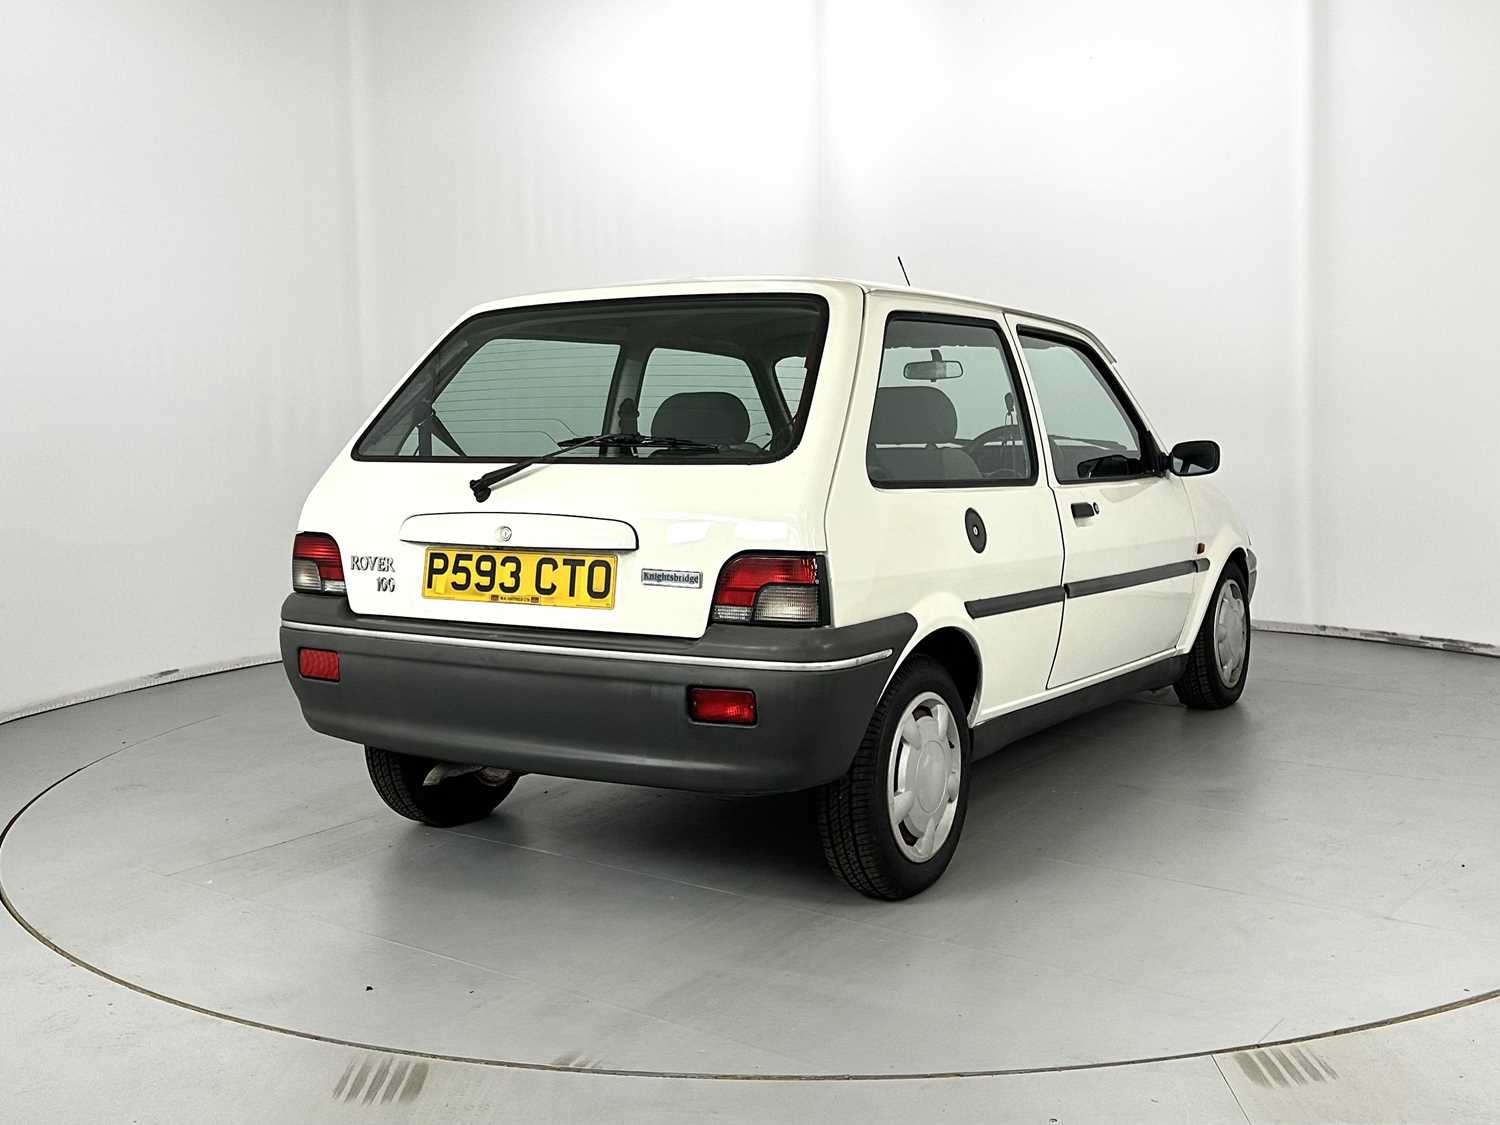 1996 Rover Metro - NO RESERVE 13,000 miles! - Image 9 of 29